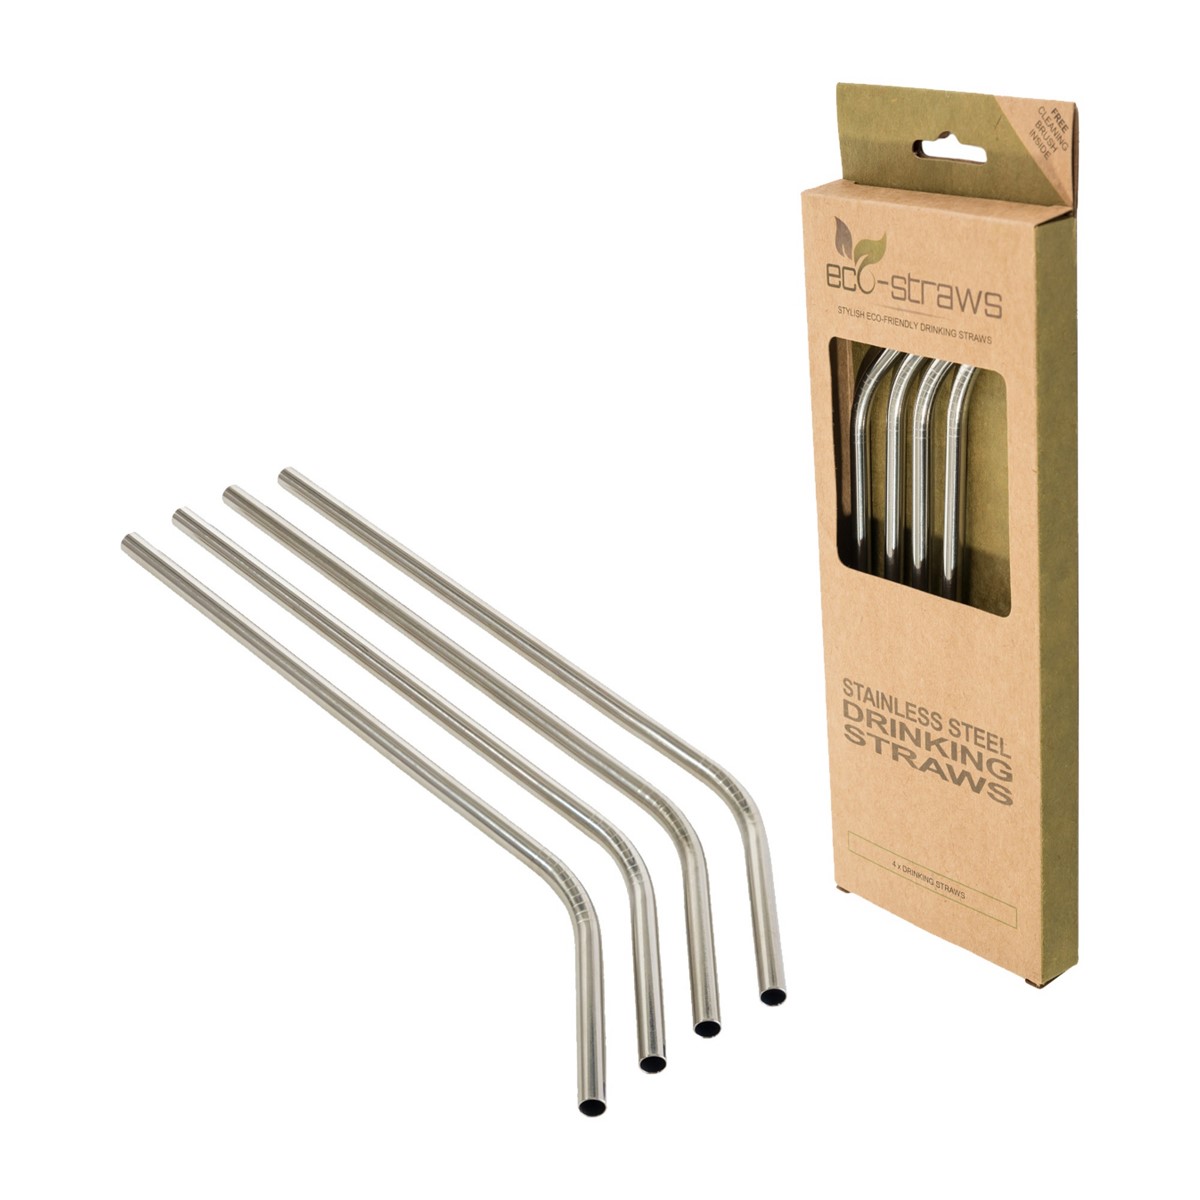 Angled Stainless Steel Drinking Straws (6mm x 215mm)